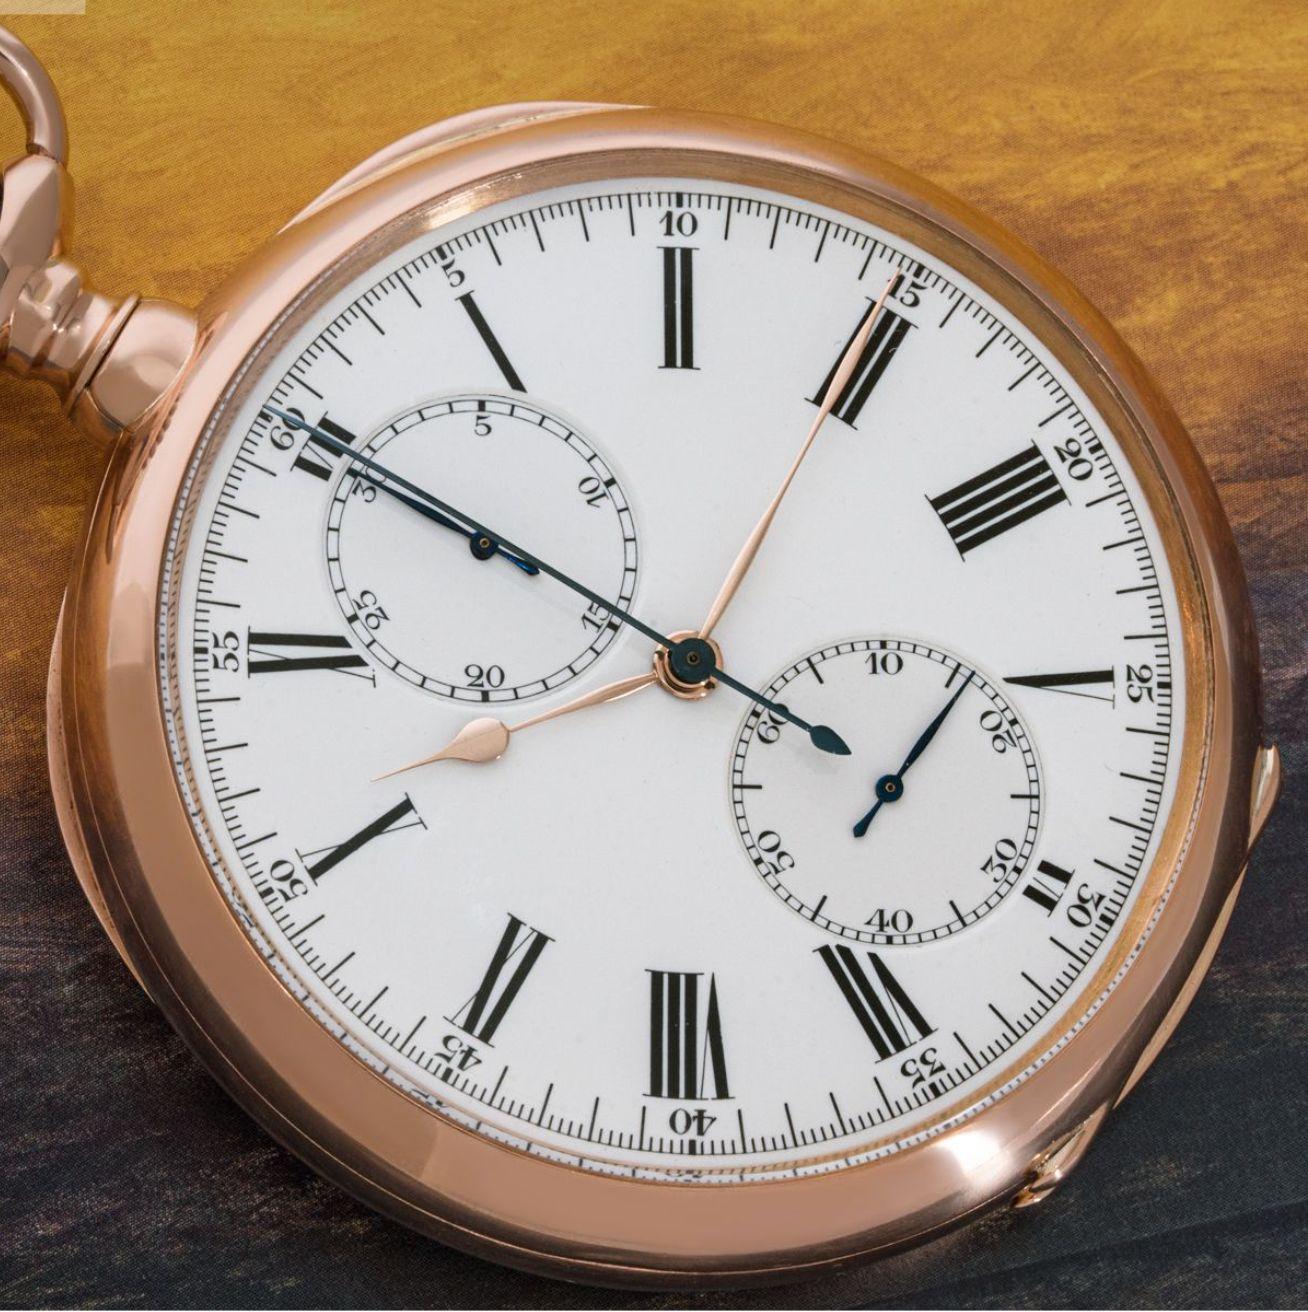 Patek Philippe Gondolo. A Rare Large Rose Gold Keyless Lever Open Face Chronograph Pocket Watch C1920s with it's Original Box.

Dial: The superb white enamel dial with Roman numerals outer minute track with Arabic five minute markers. The subsidiary